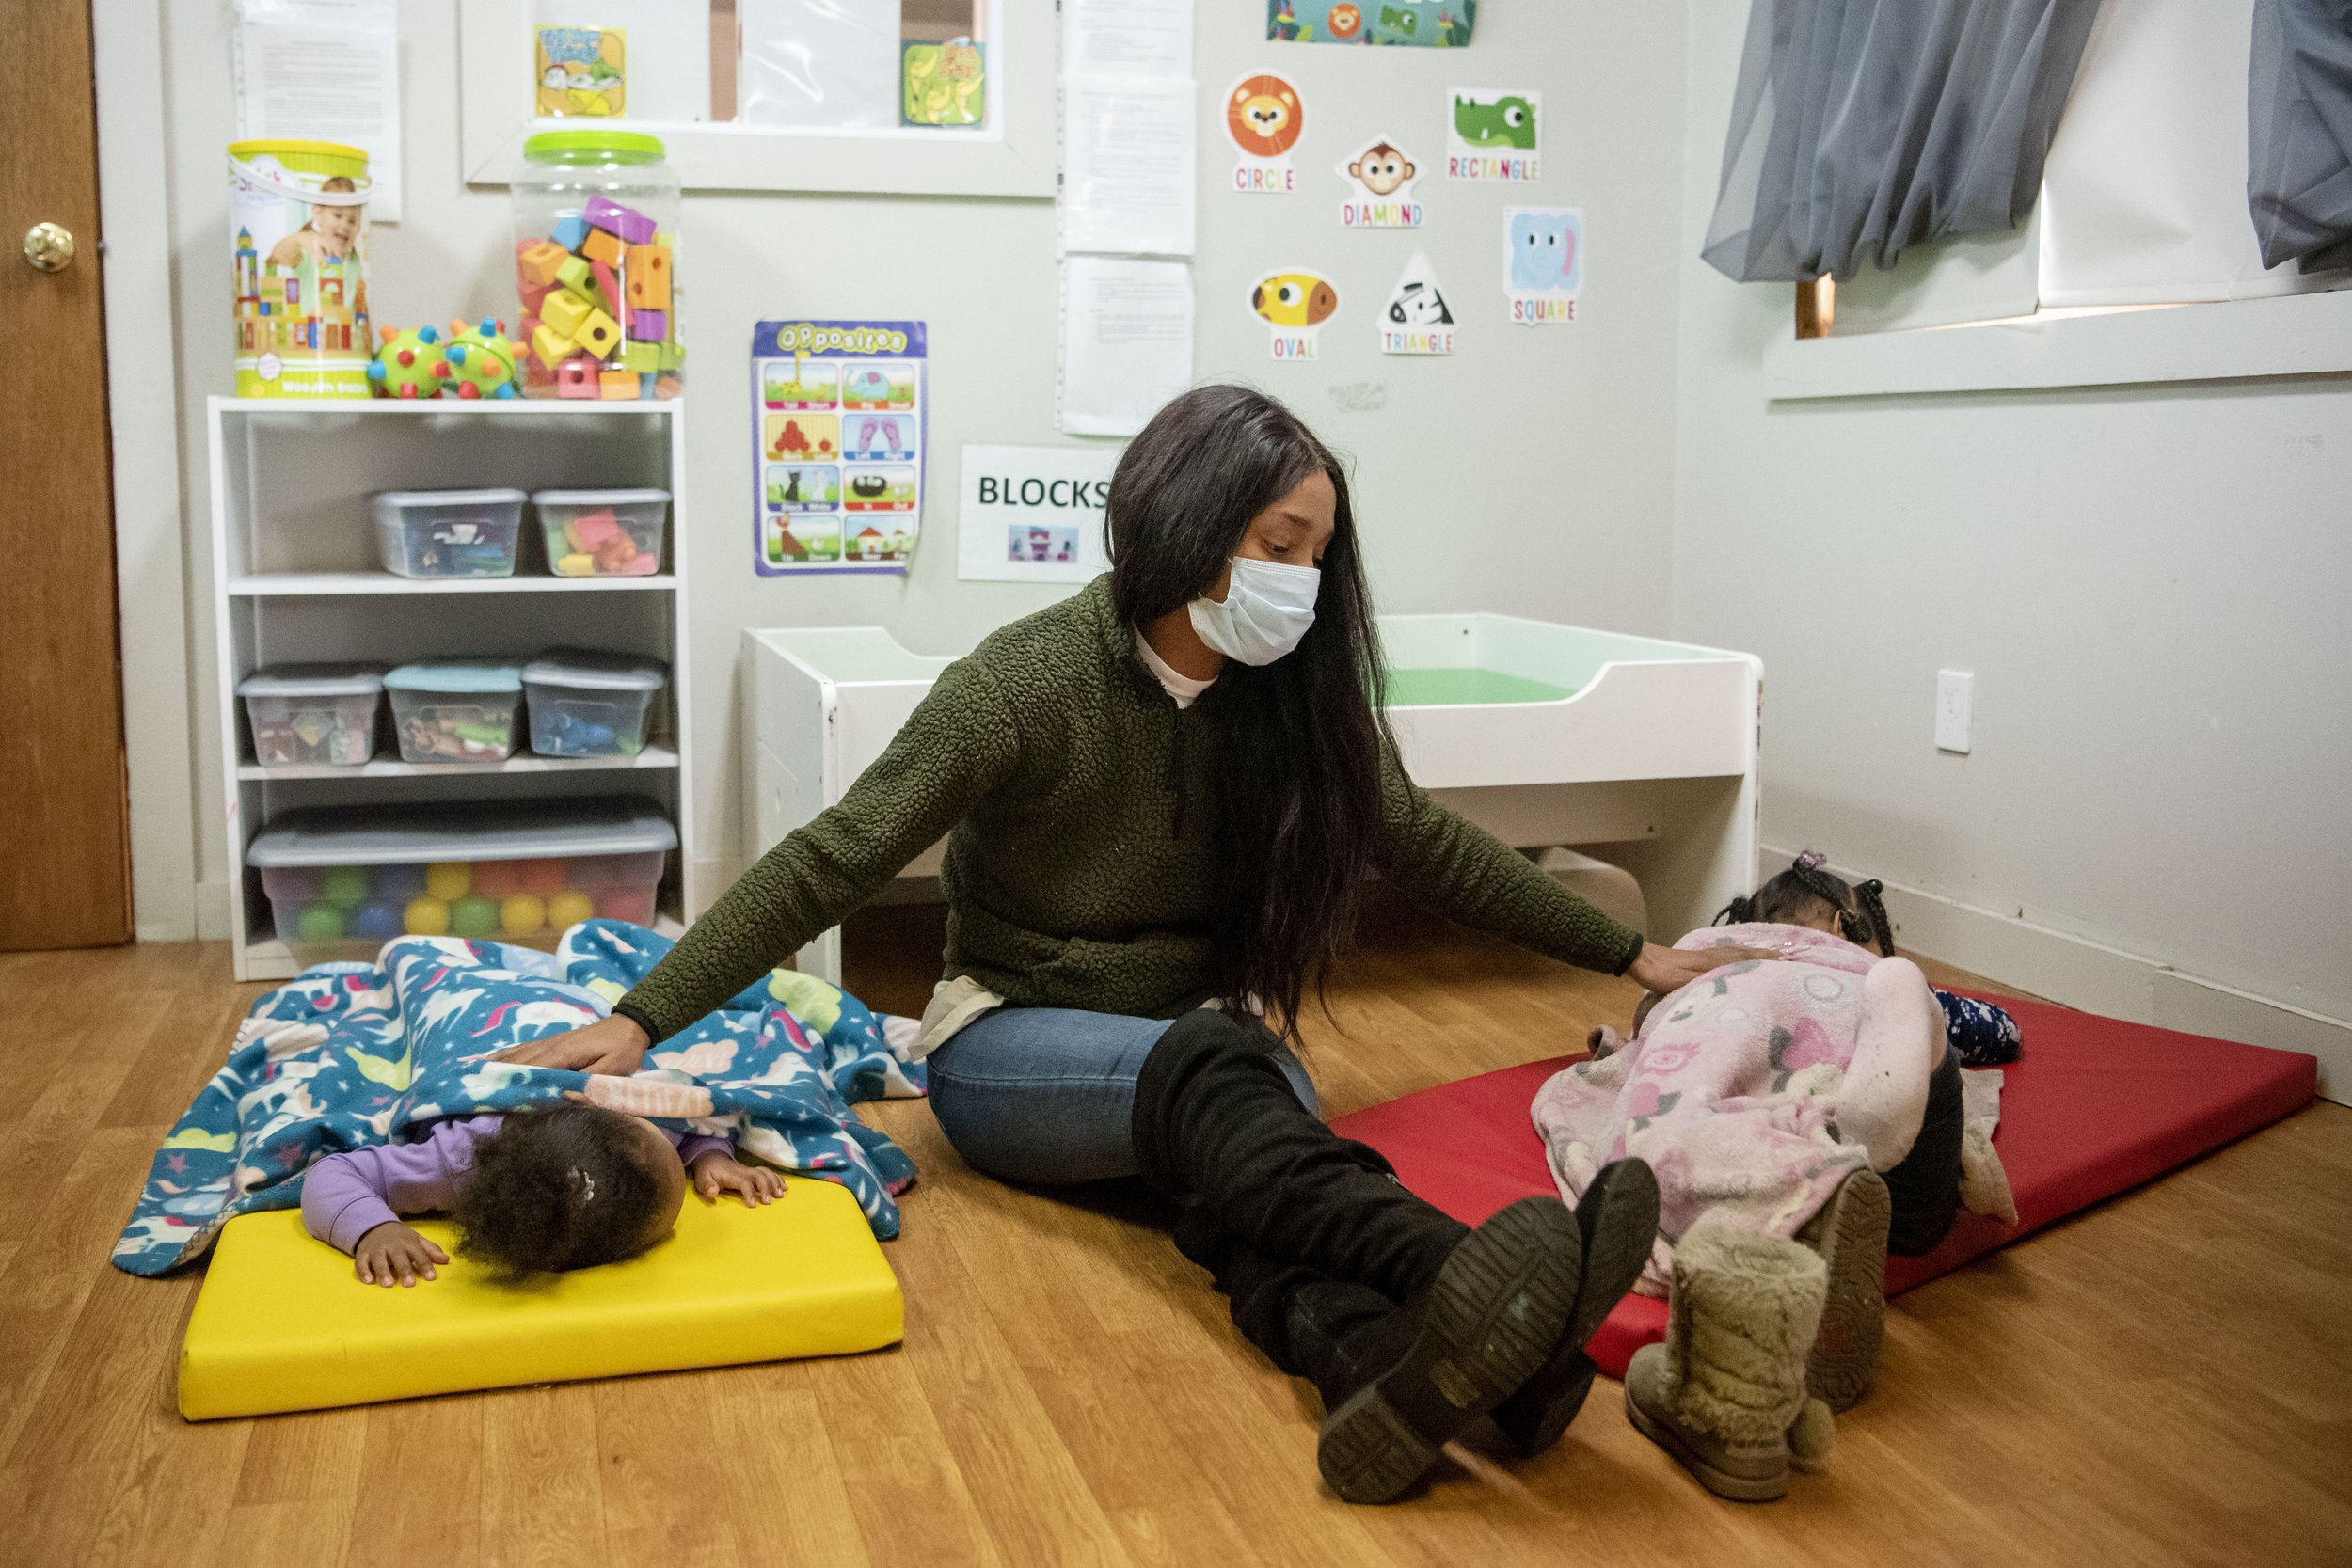  Program director Nita Hinton settles Legacy Cole, 1, and Karsyn McNutt, 3, down for a nap at Lens Learning Center in Battle Creek, Michigan on Monday, March 1. Hinton established the 24-hour daycare with the goal of enhancing access to childcare ser